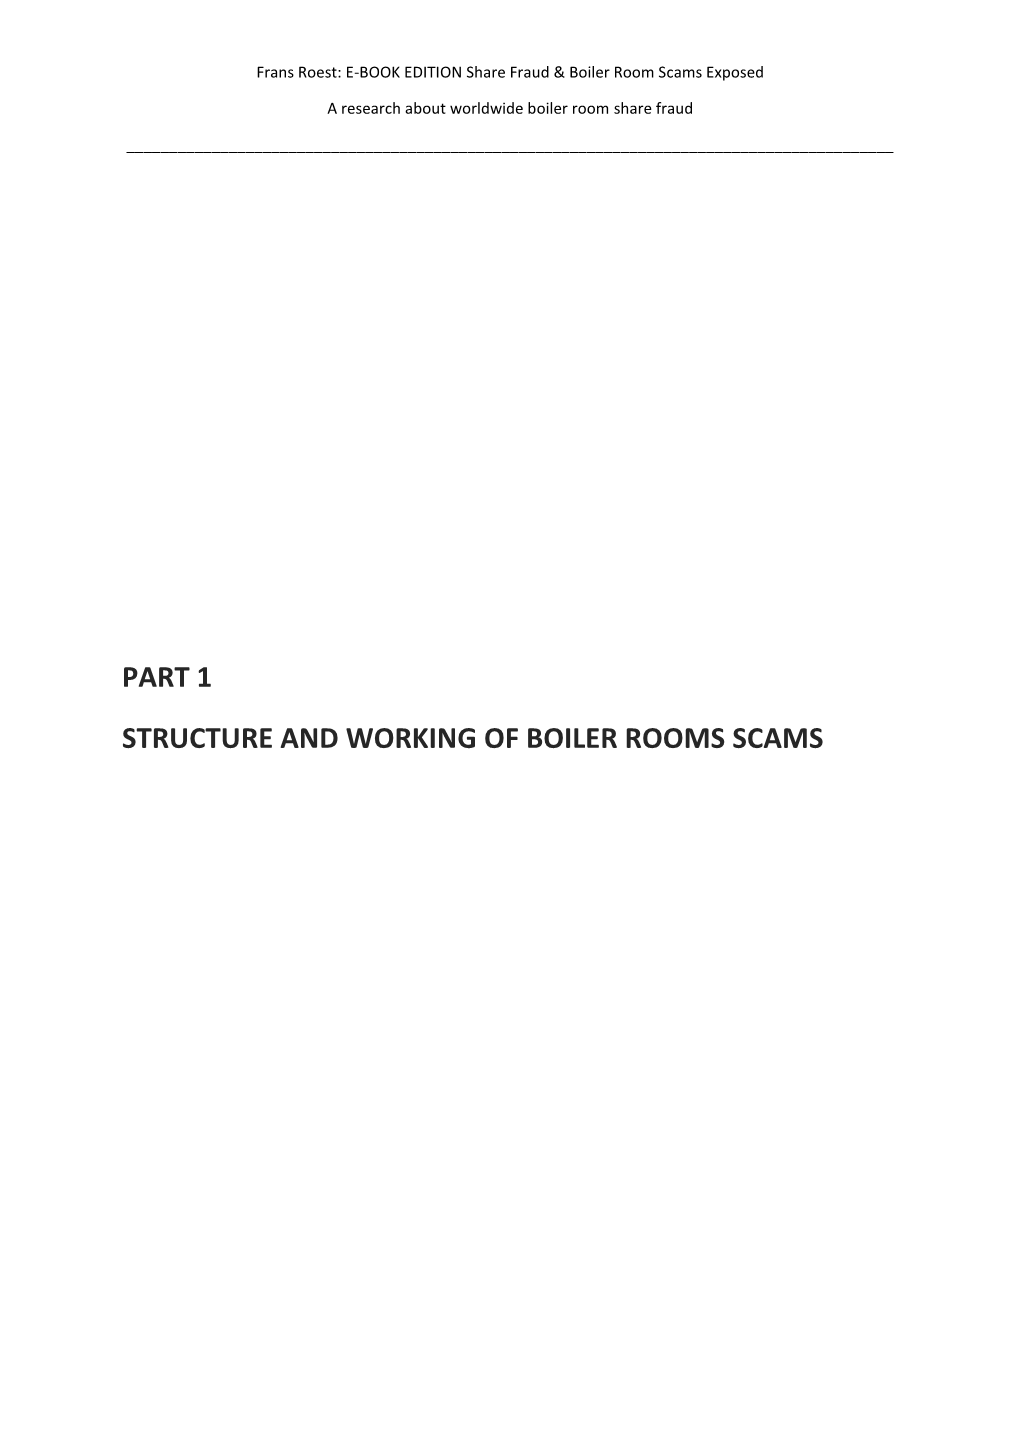 Part 1 Structure and Working of Boiler Rooms Scams